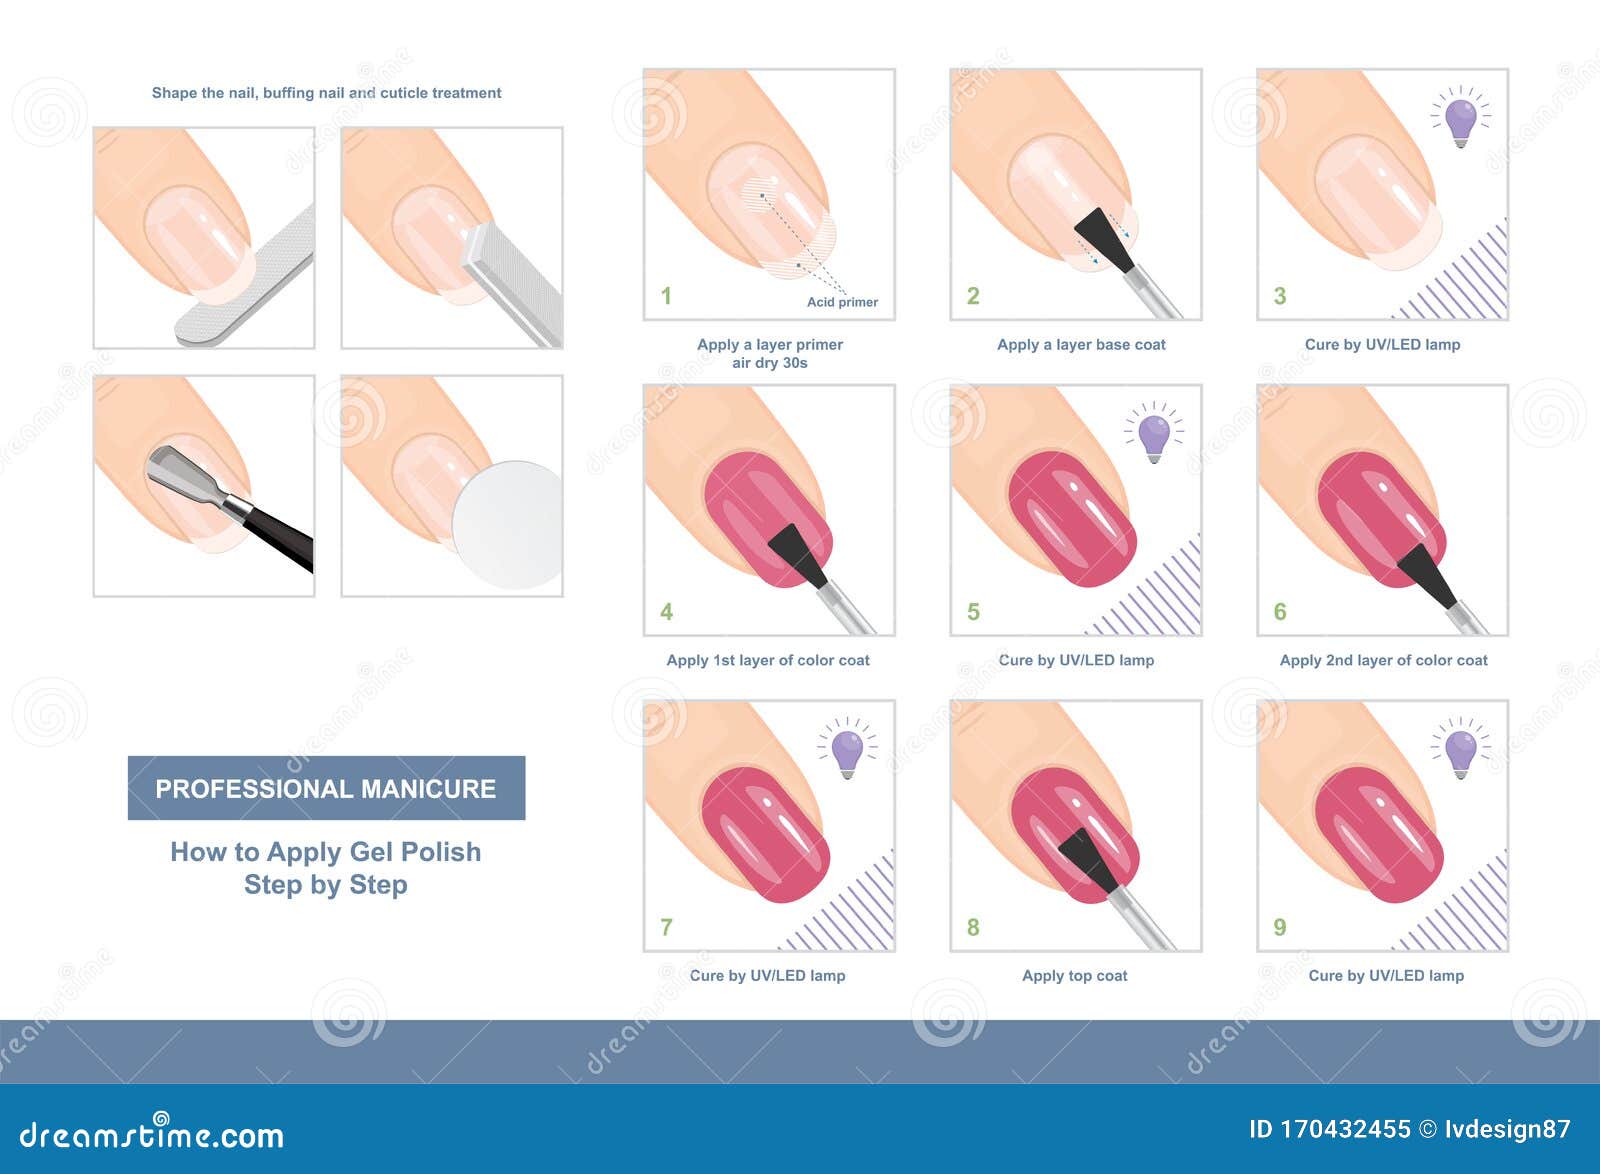 Step by Step Guide for Designer Nail Polish Application - wide 3